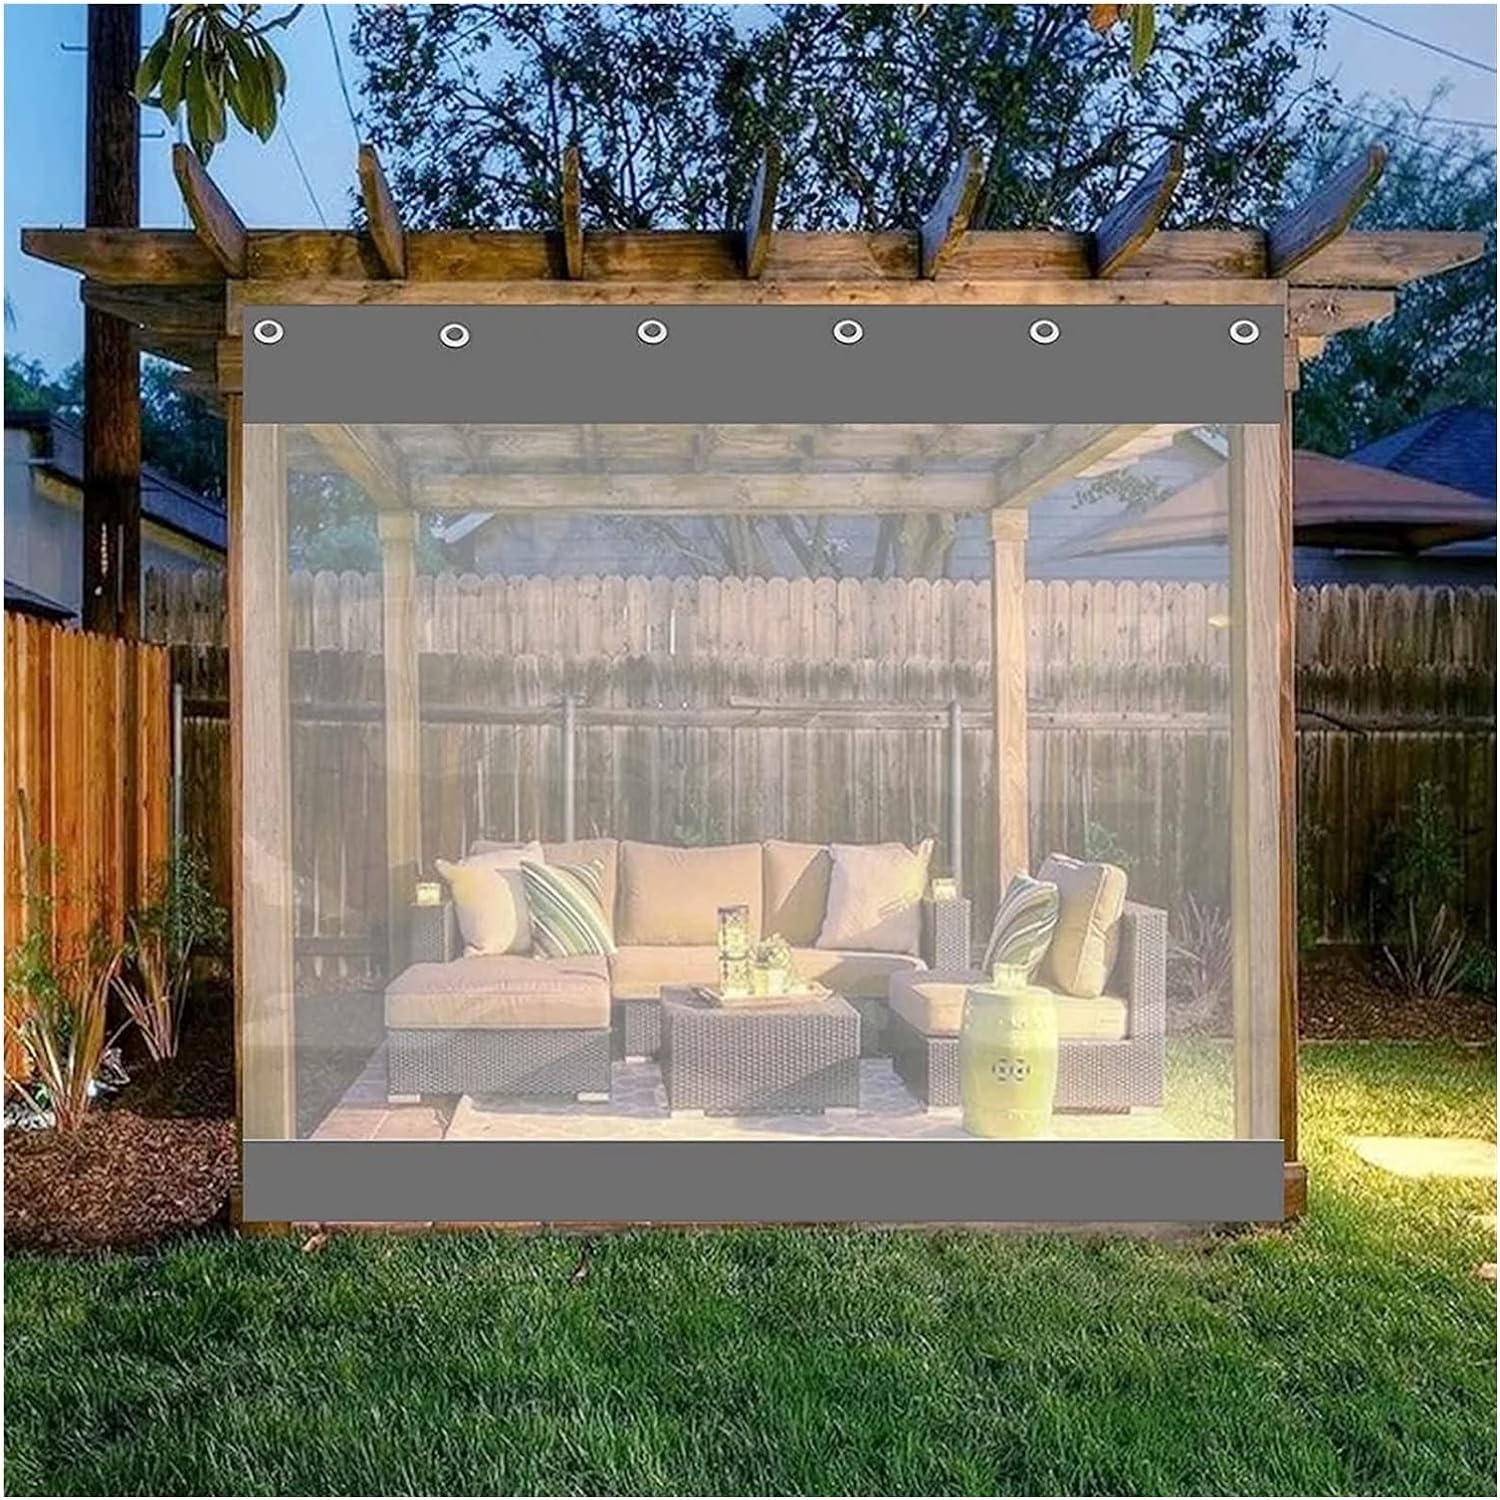 Clear Tarps Panel Waterproof Tarpaulin Sheet Outdoor Curtain Drapes UV Weather Resistant PVC Curtains for Patios, Porch, Screen Rooms, Gazebos，Customizable (Color : Gray, Size : 11.48x8.2ft/3.5x2.5m